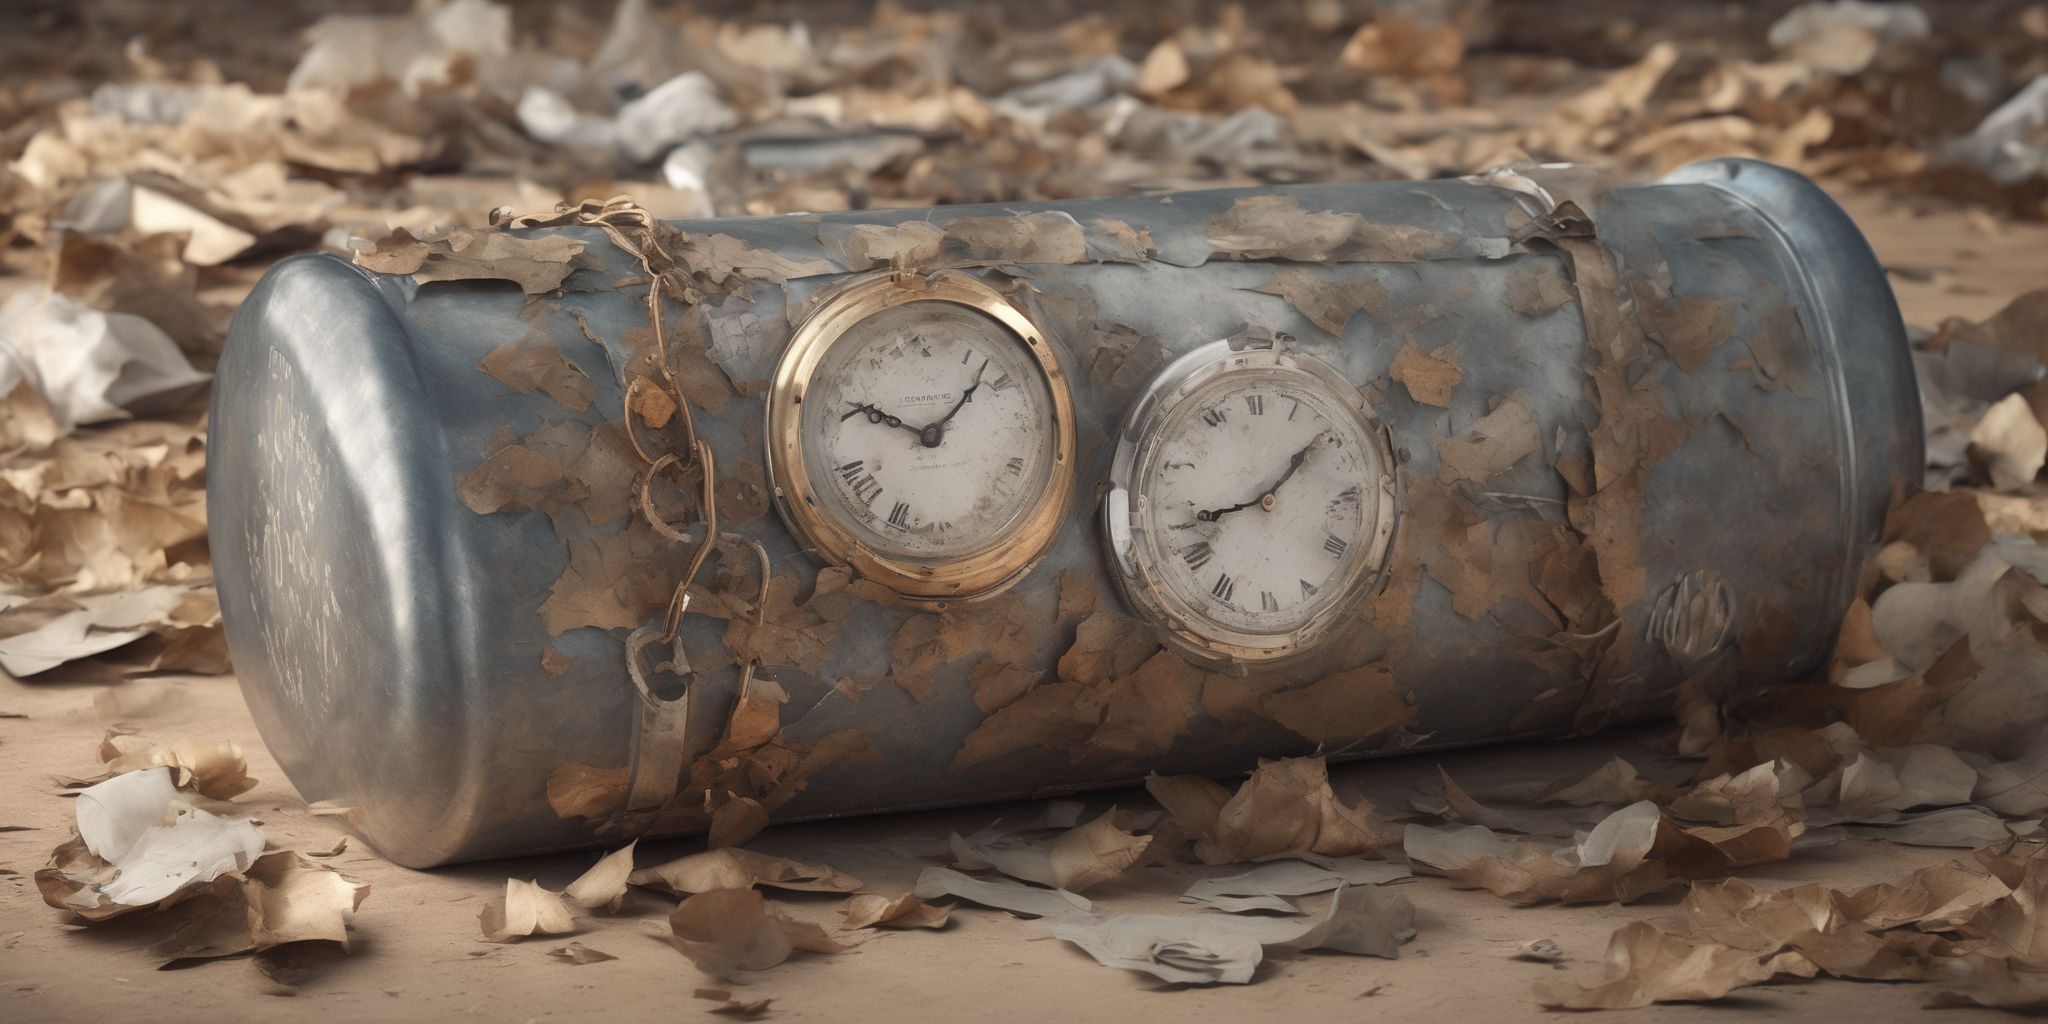 Time capsule  in realistic, photographic style